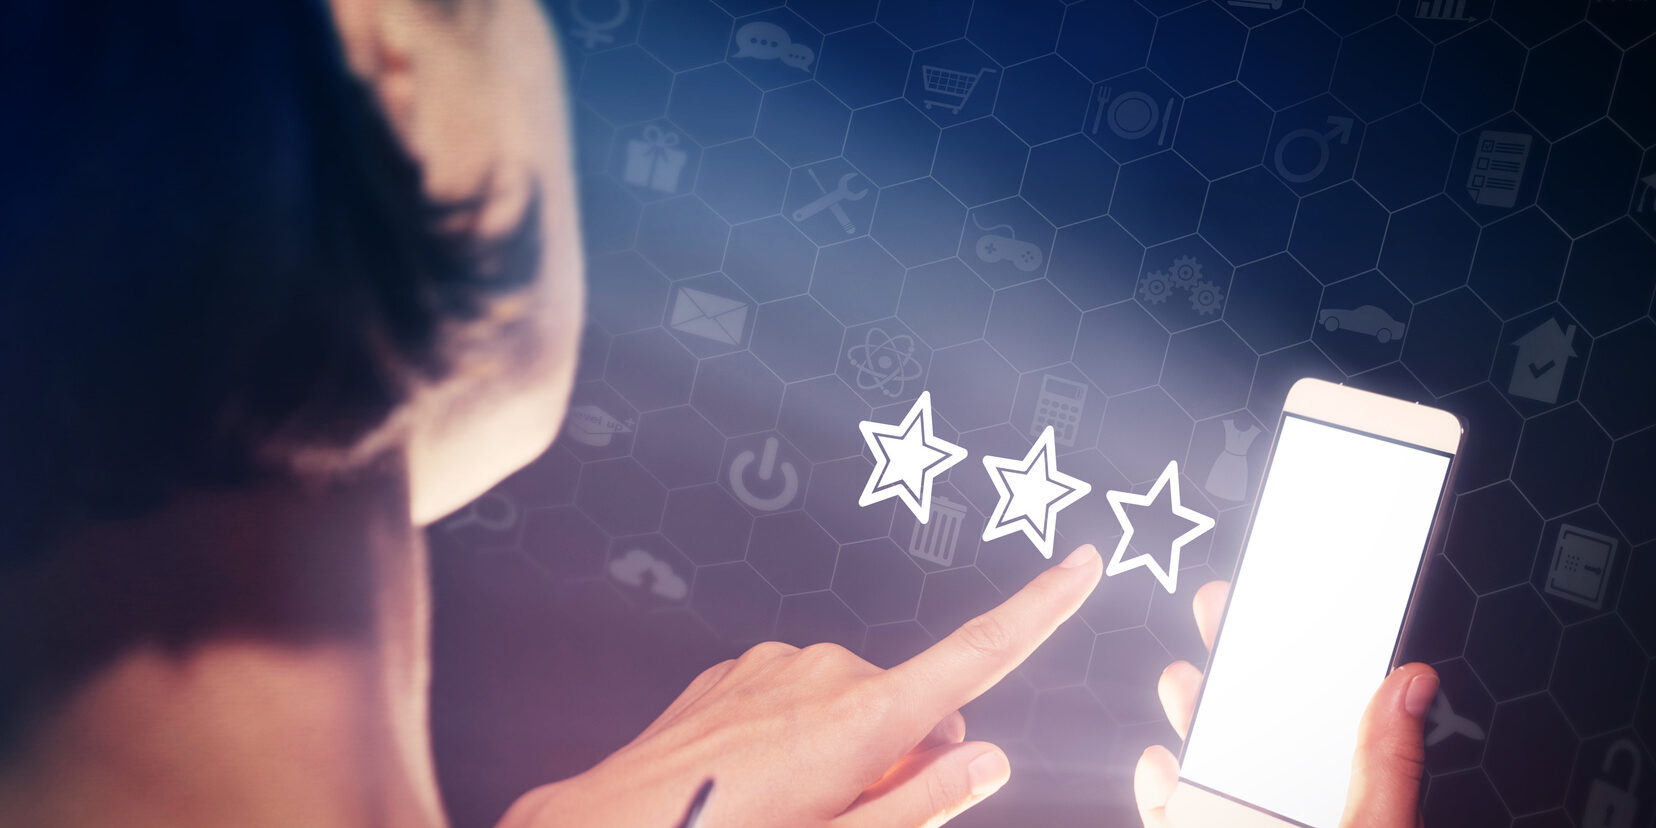 reviews online | Vanguard Communications | Denver | woman selecting a two-star rating on smartphone